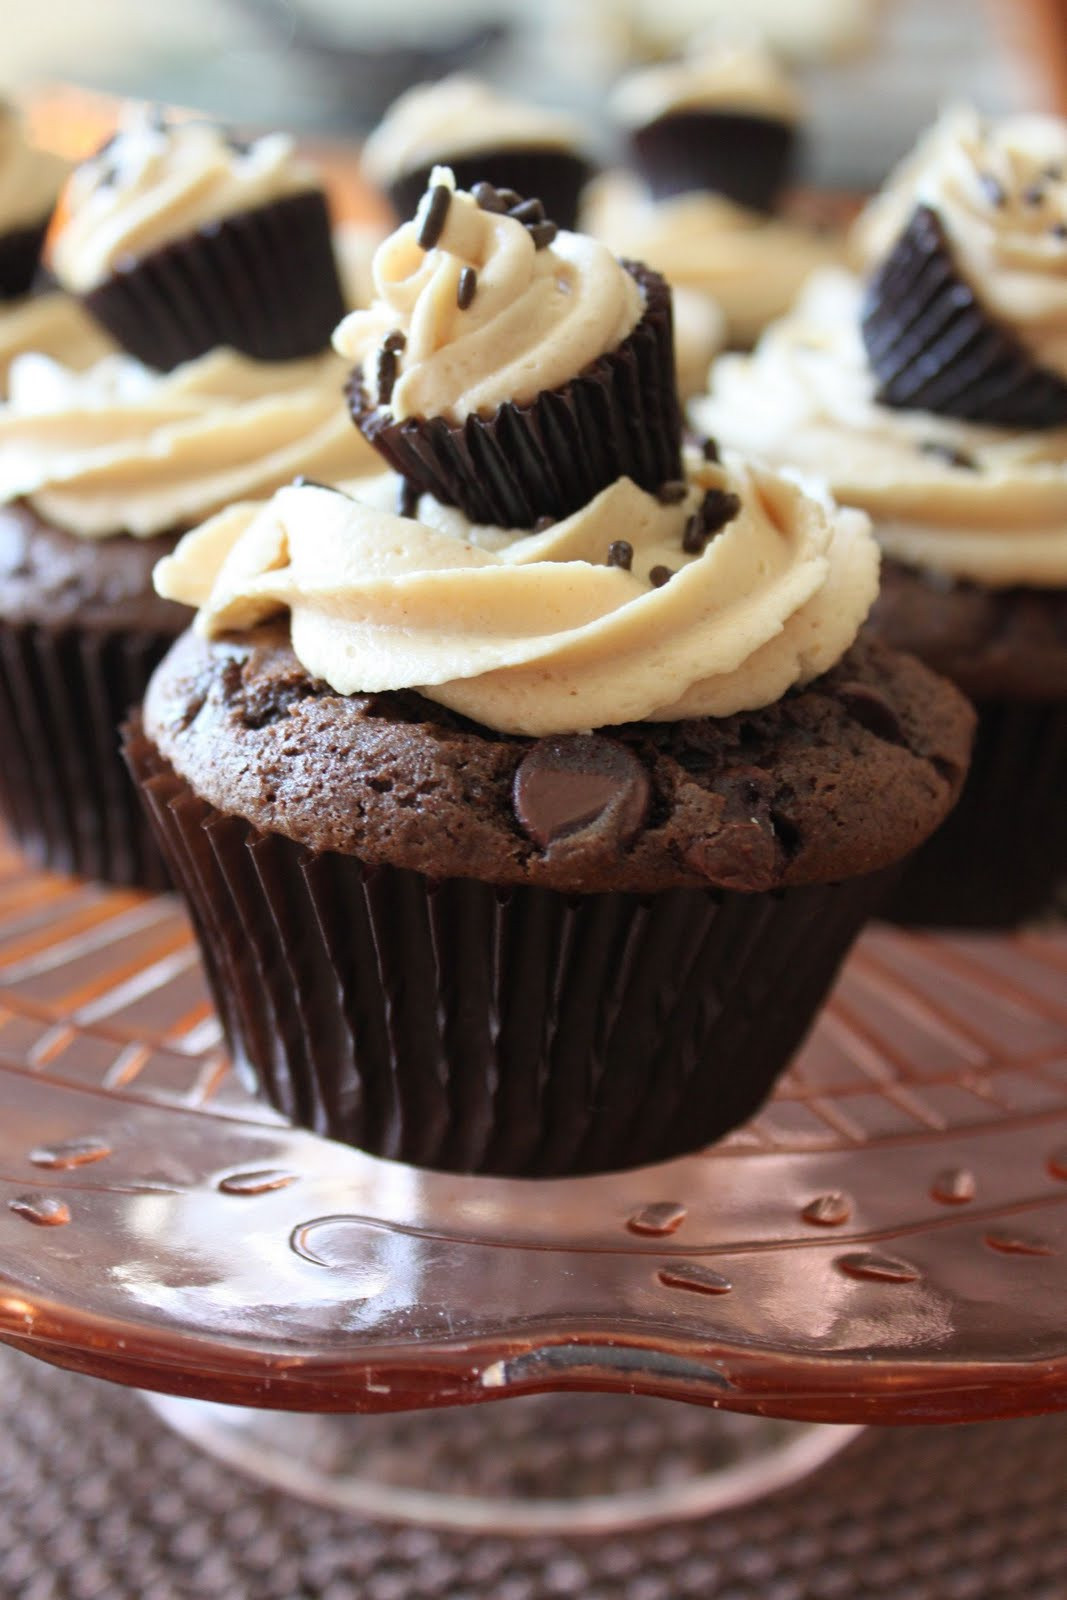 Chocolate Cupcakes With Peanut Butter Frosting
 Baked Perfection Chocolate Cupcakes with Peanut Butter